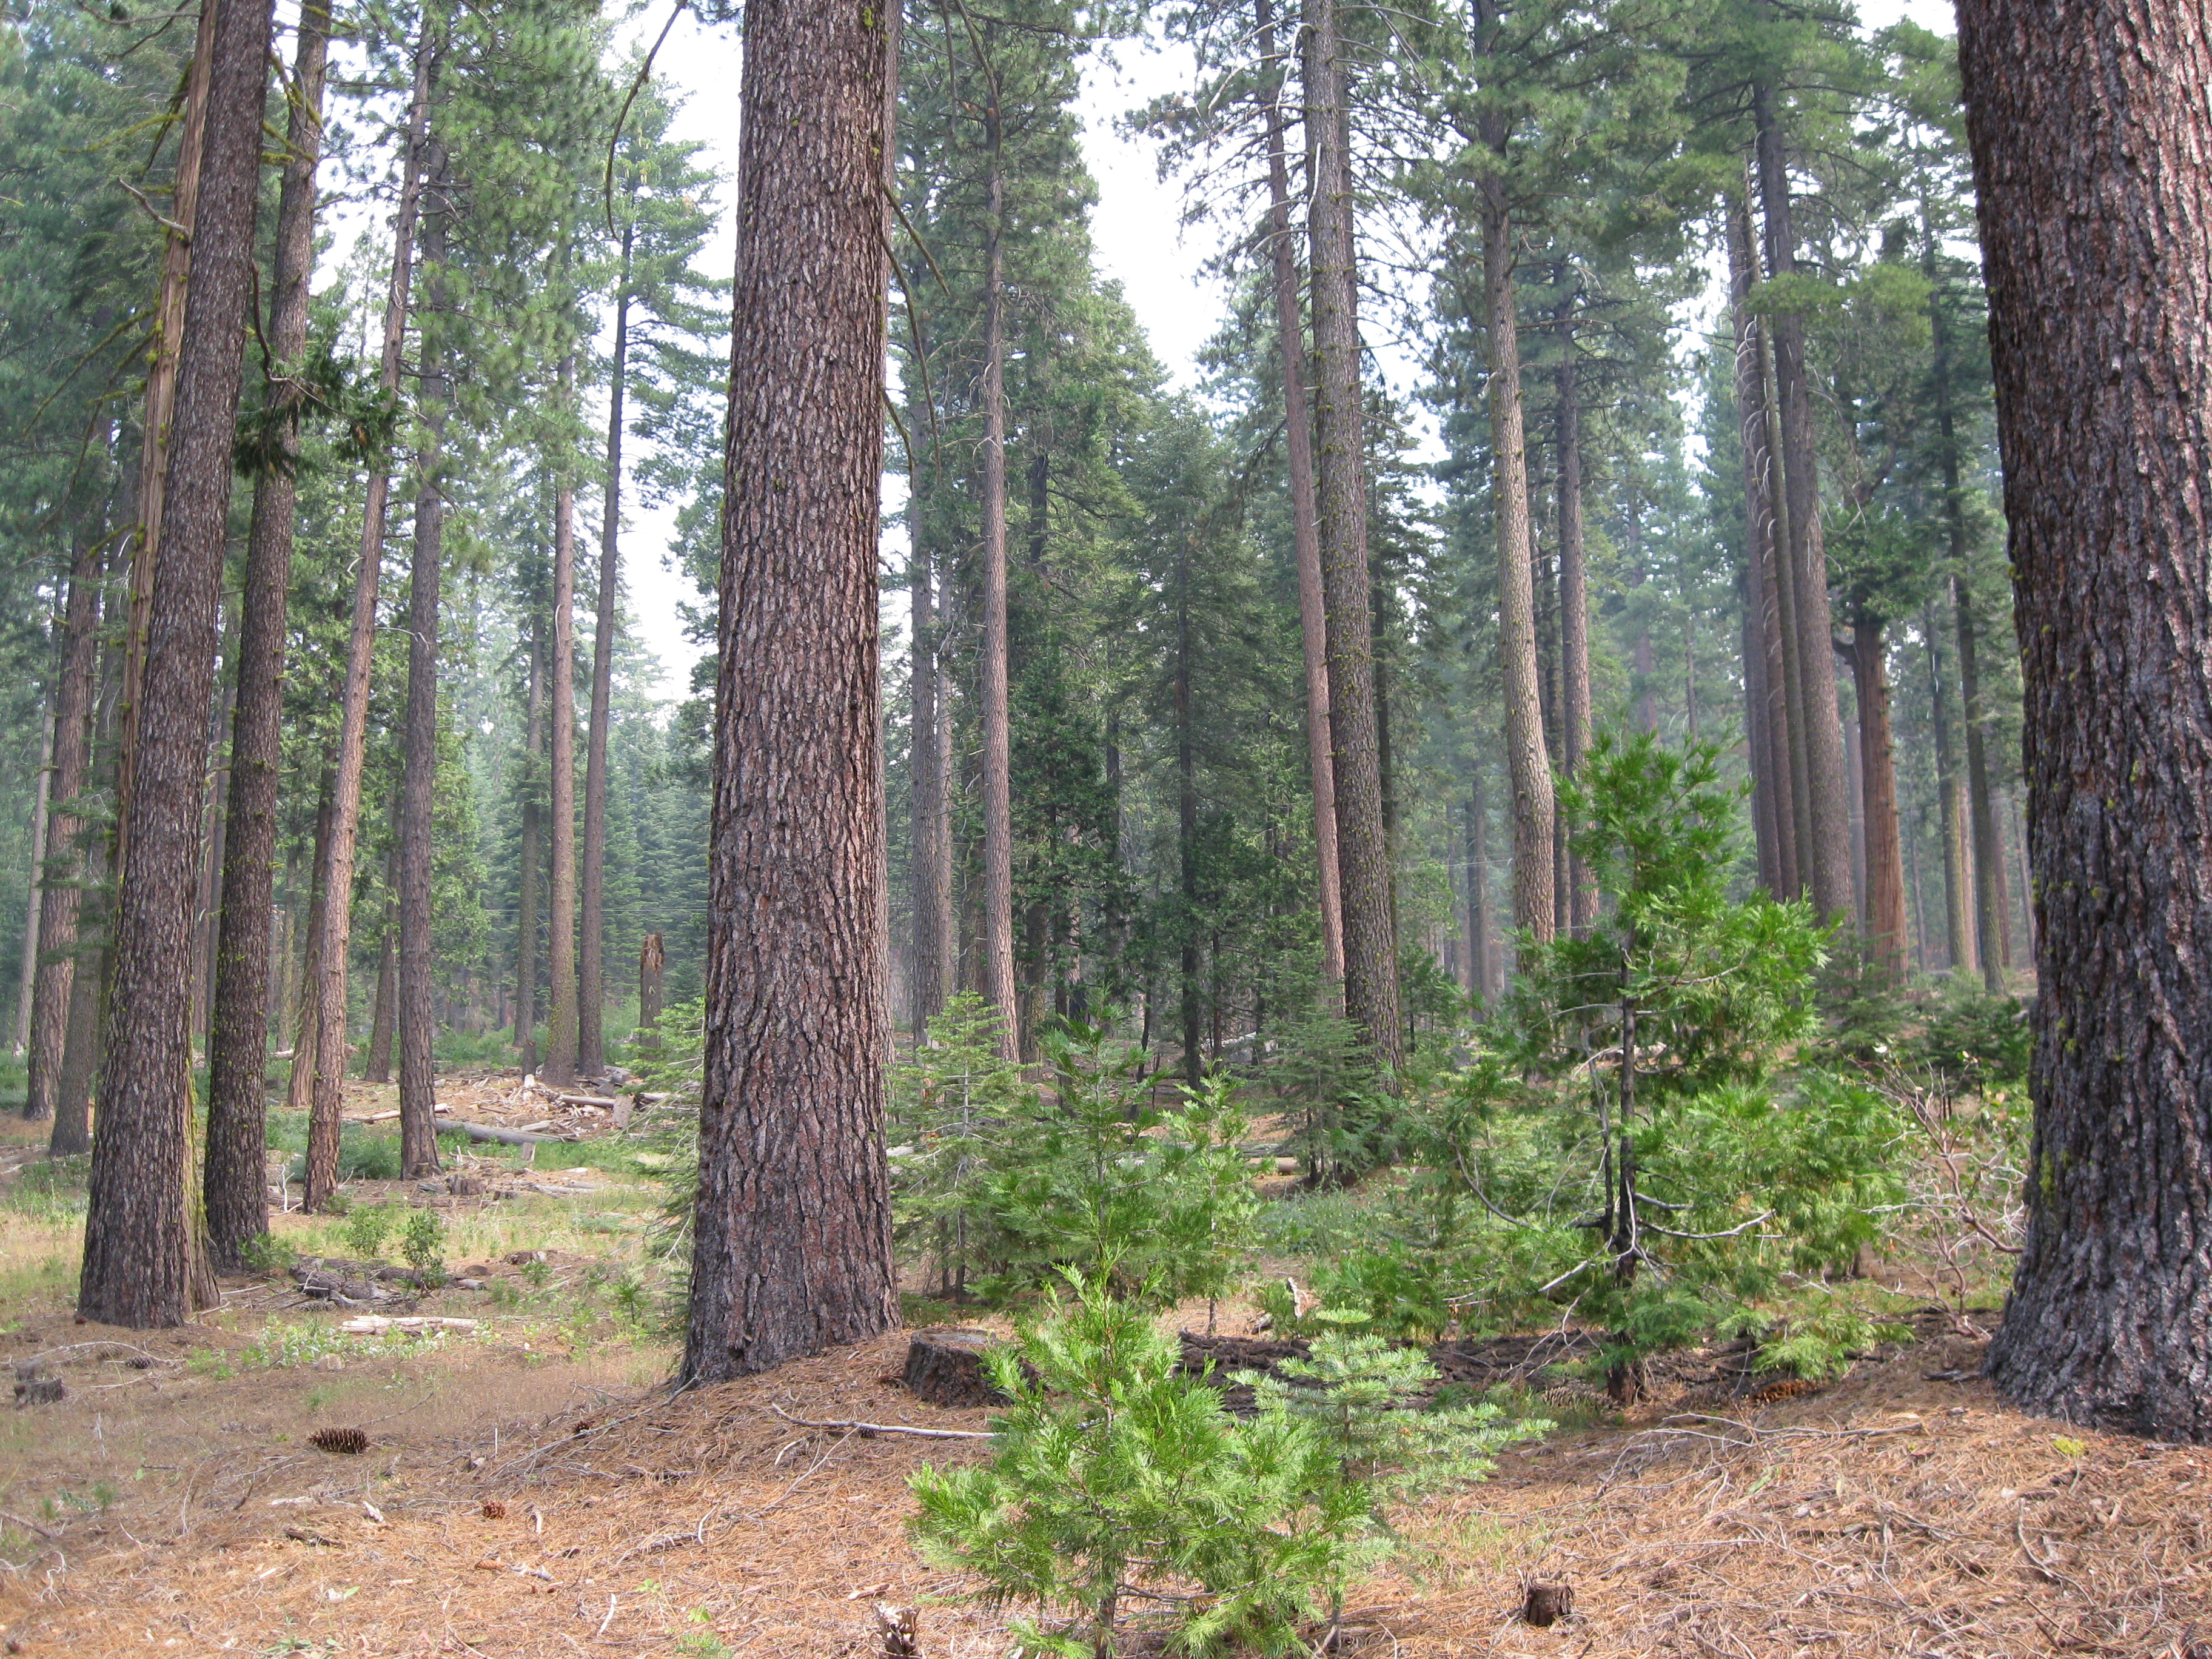 An example of a forest that has been thinned.